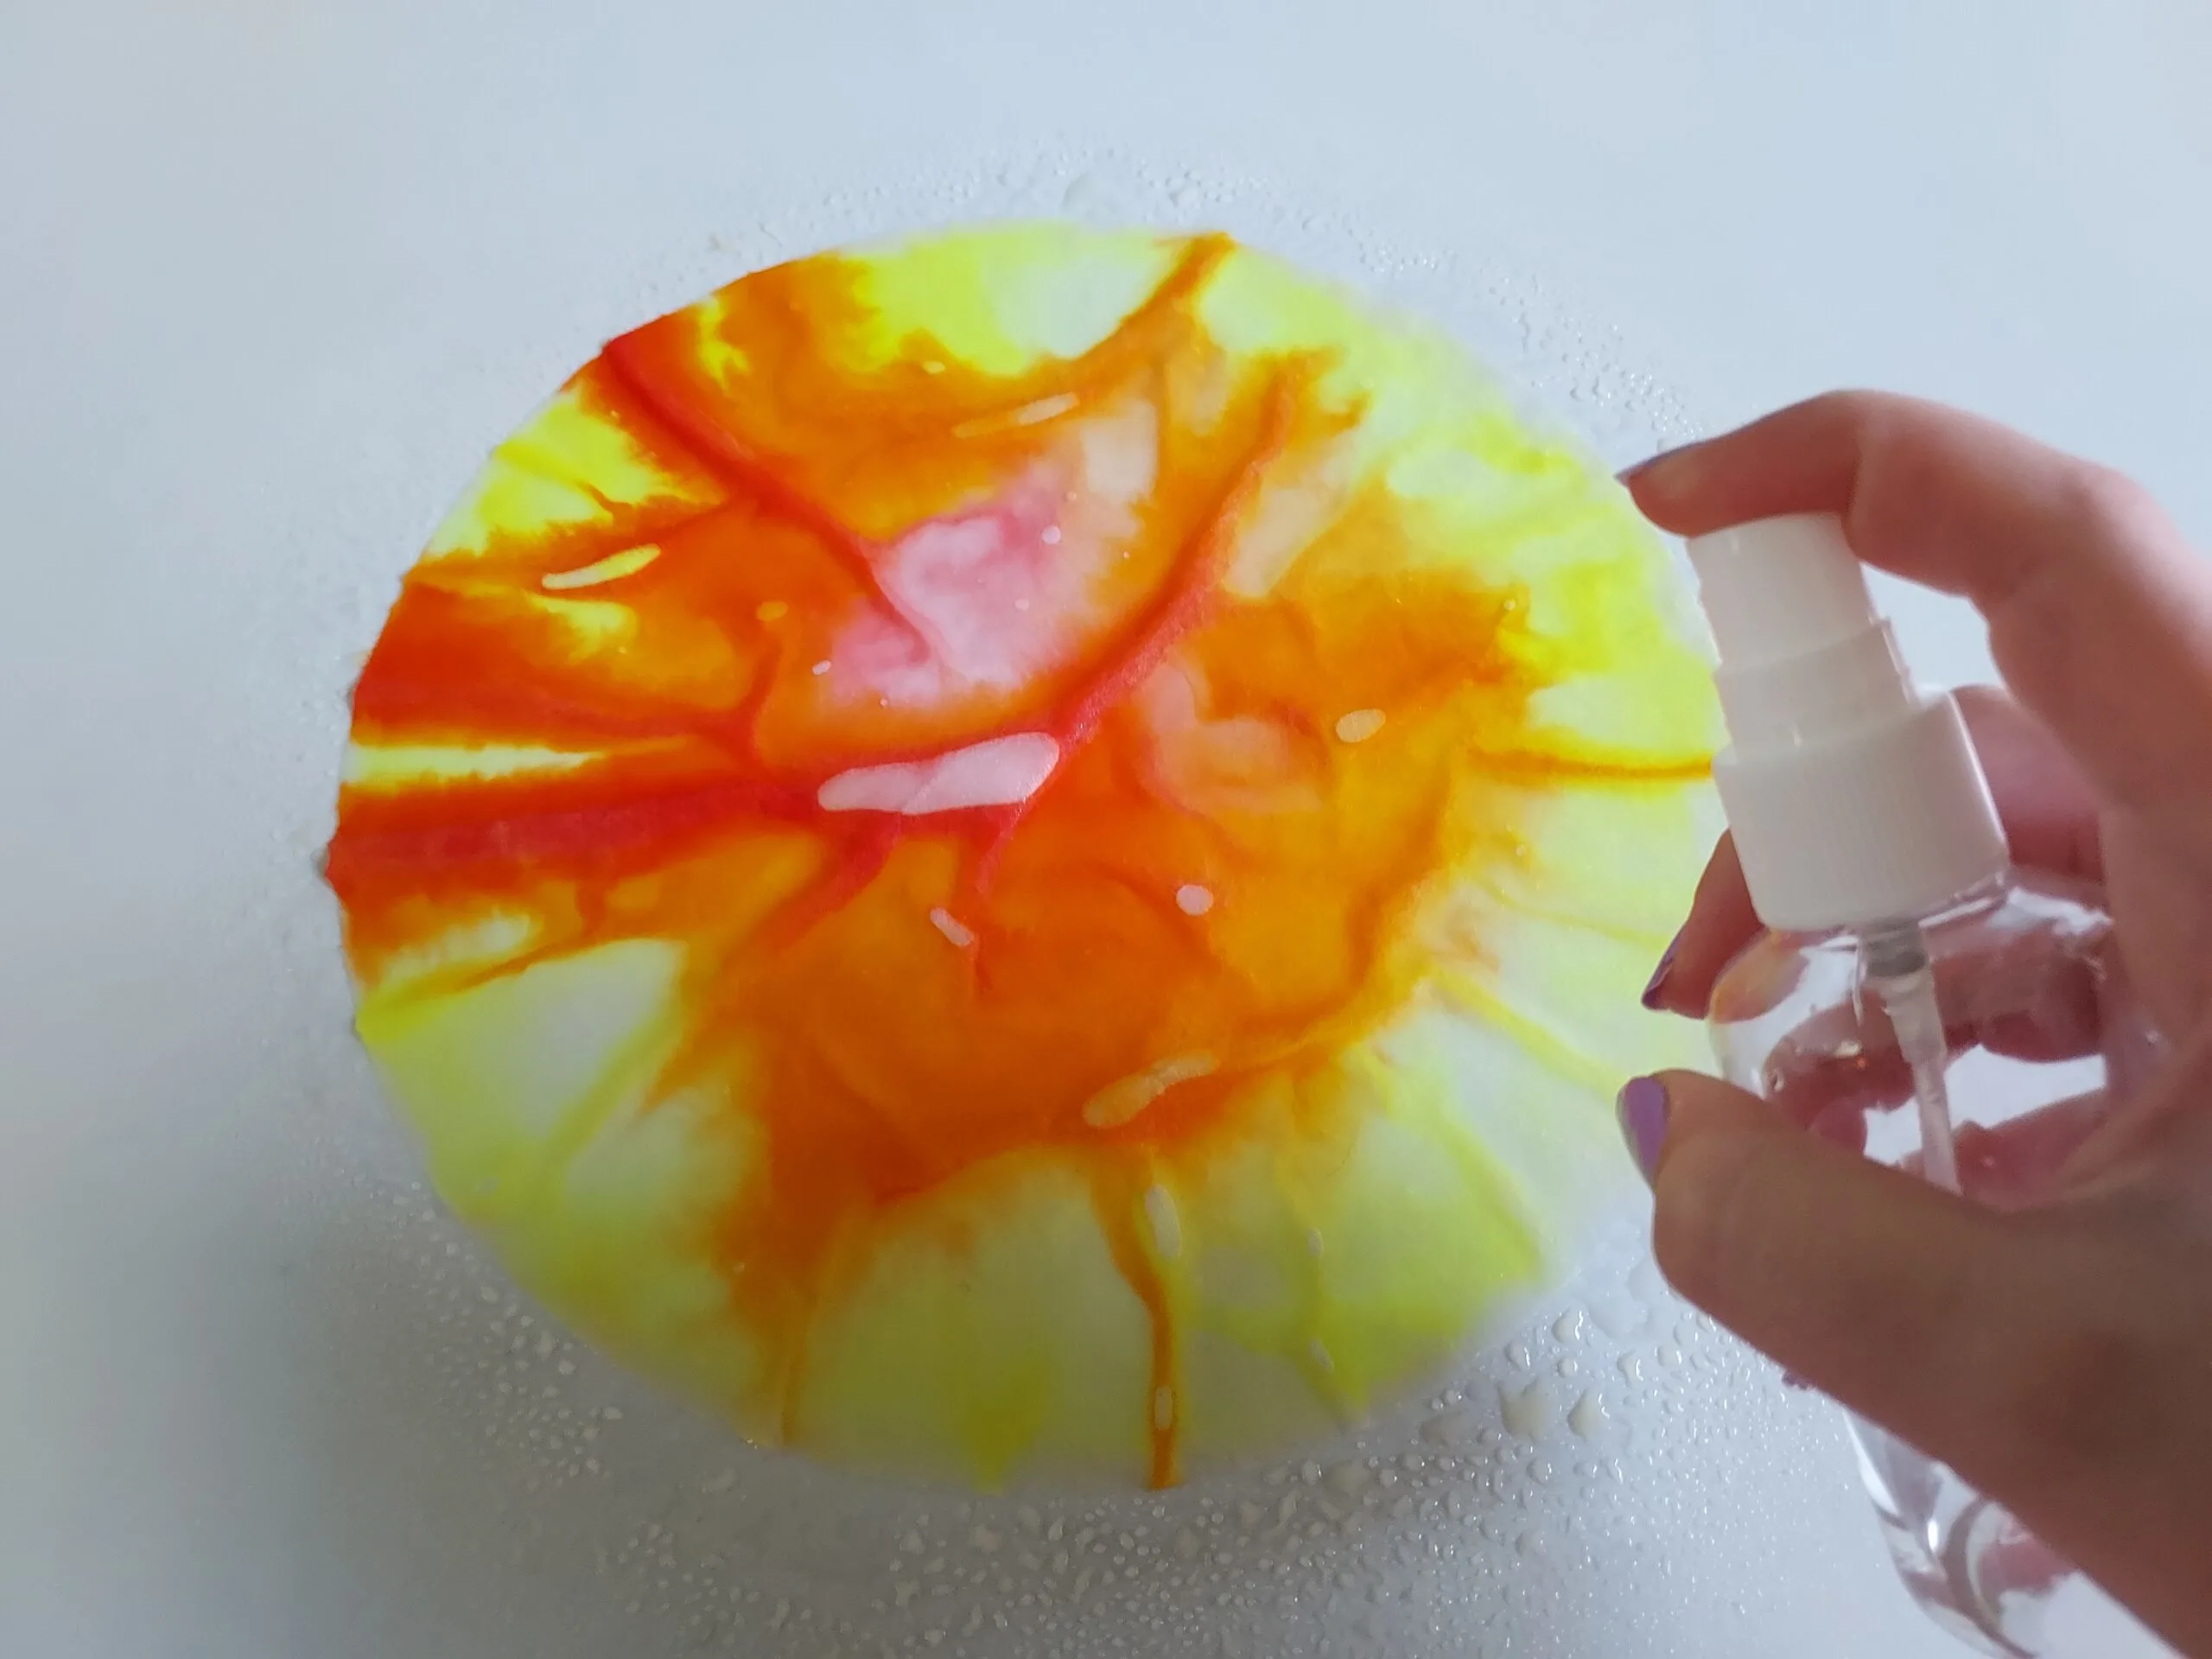 White person's hand using finger tip spray bottle to spray water on coffee filter colored with markers.